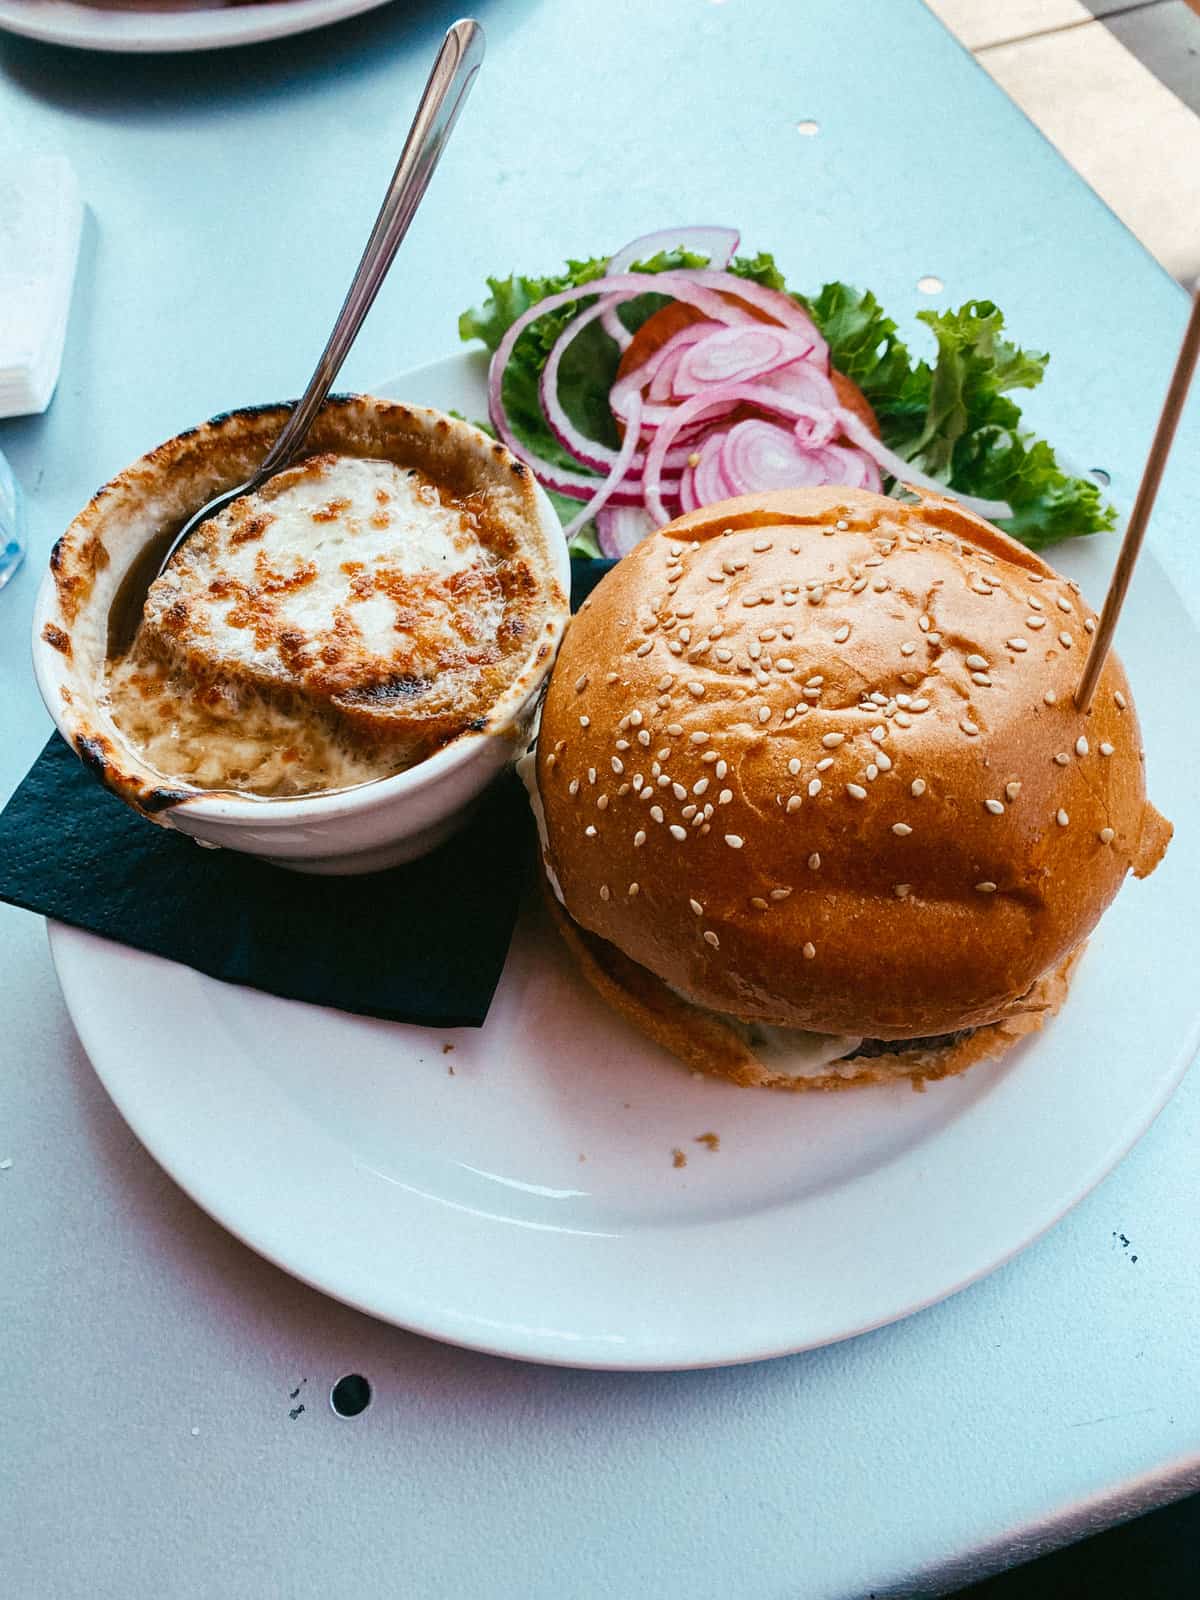 A cup of french onion soup and juicy burger.